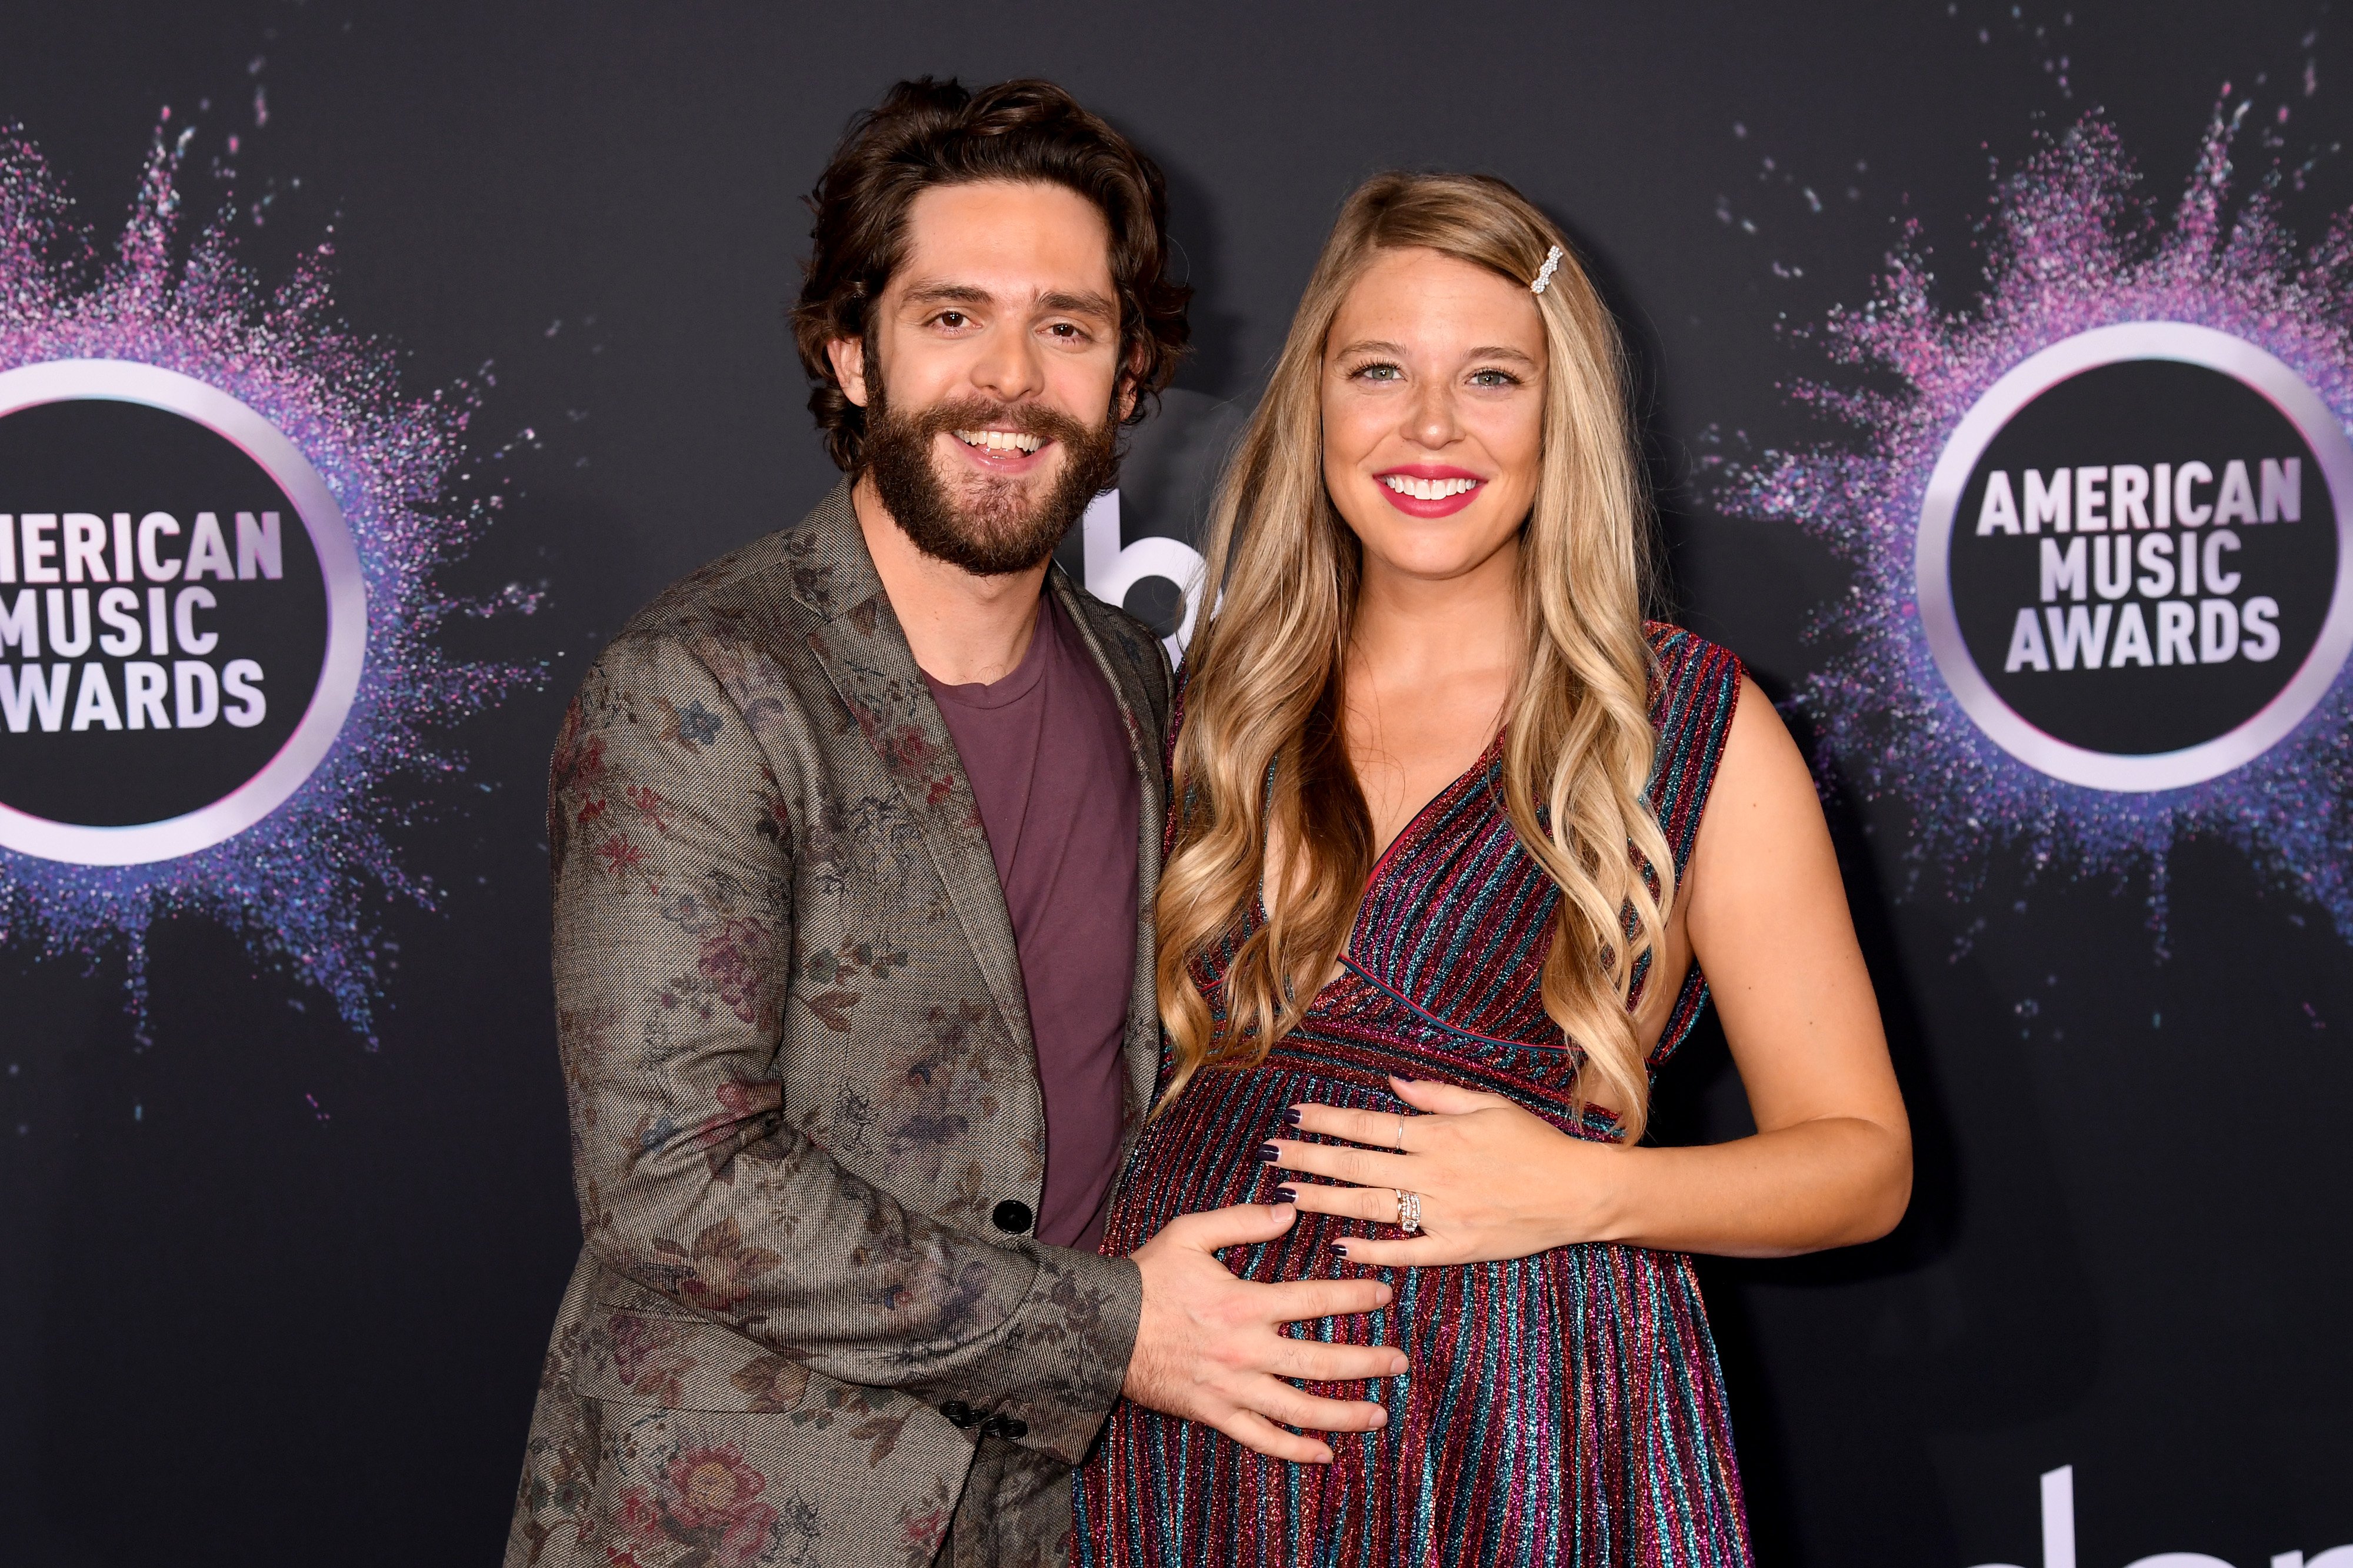 Country music singer Thomas Rhett with his wife and book author Lauren Akins attend the 2019 American Music Awards. | Photo: Getty Images